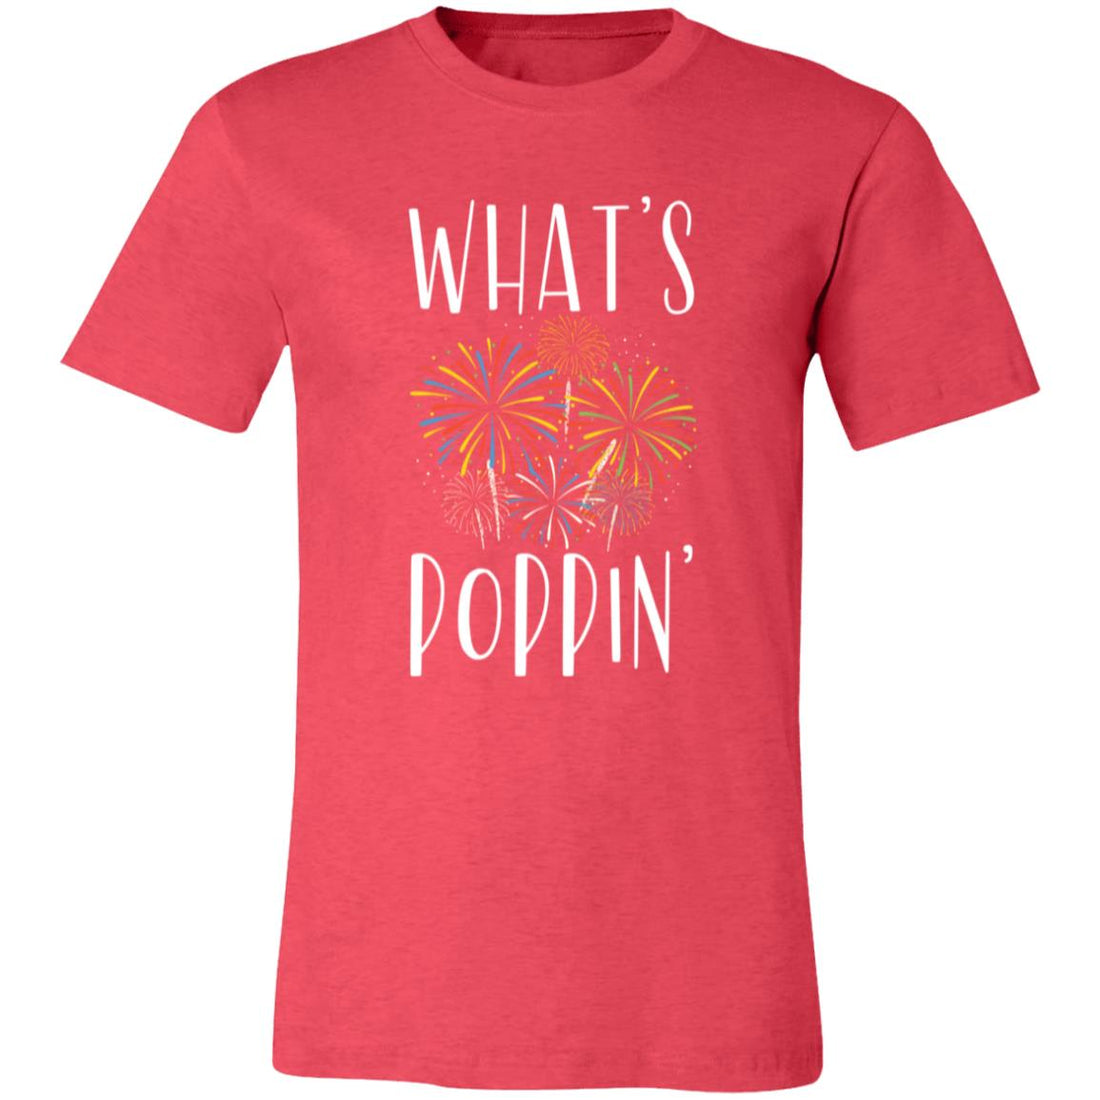 What's Poppin' T-Shirt - T-Shirts - Positively Sassy - What's Poppin' T-Shirt